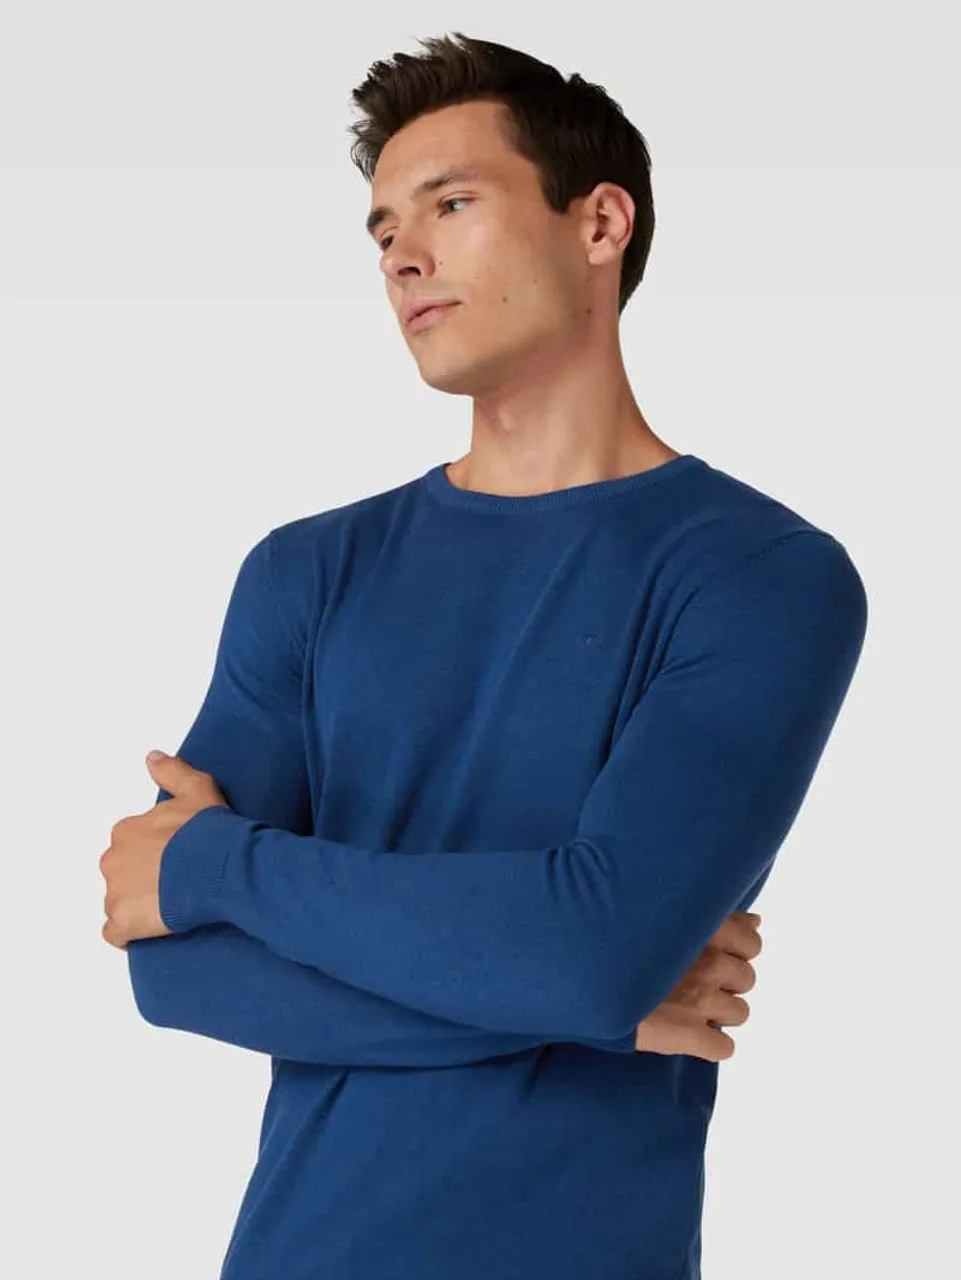 Tom Tailor Strickpullover mit Label-Stitching Modell 'BASIC' in Royal